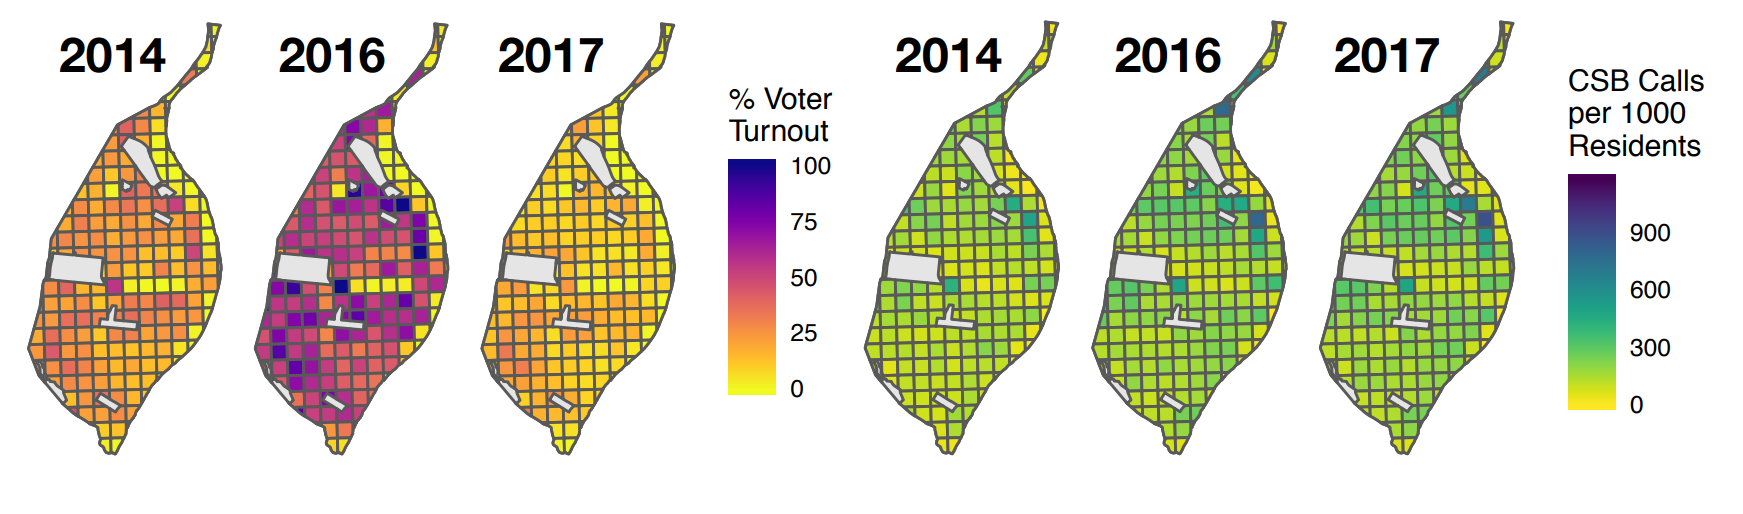 Voter Turnout and Call Density